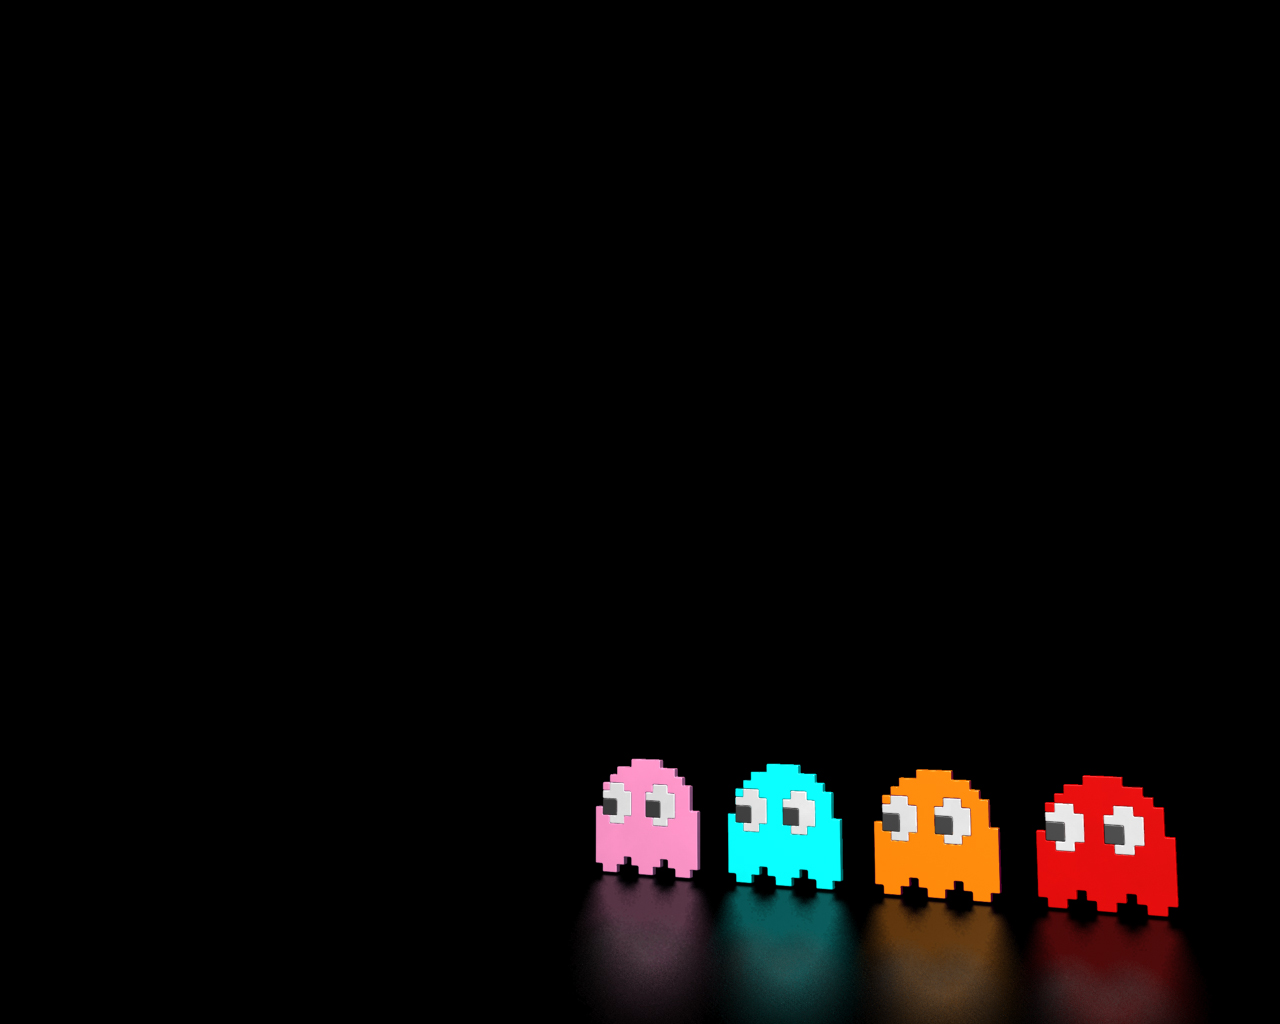 Pacman Ghost Wallpaper Background Pink Blue Orange Red Classic Arcade